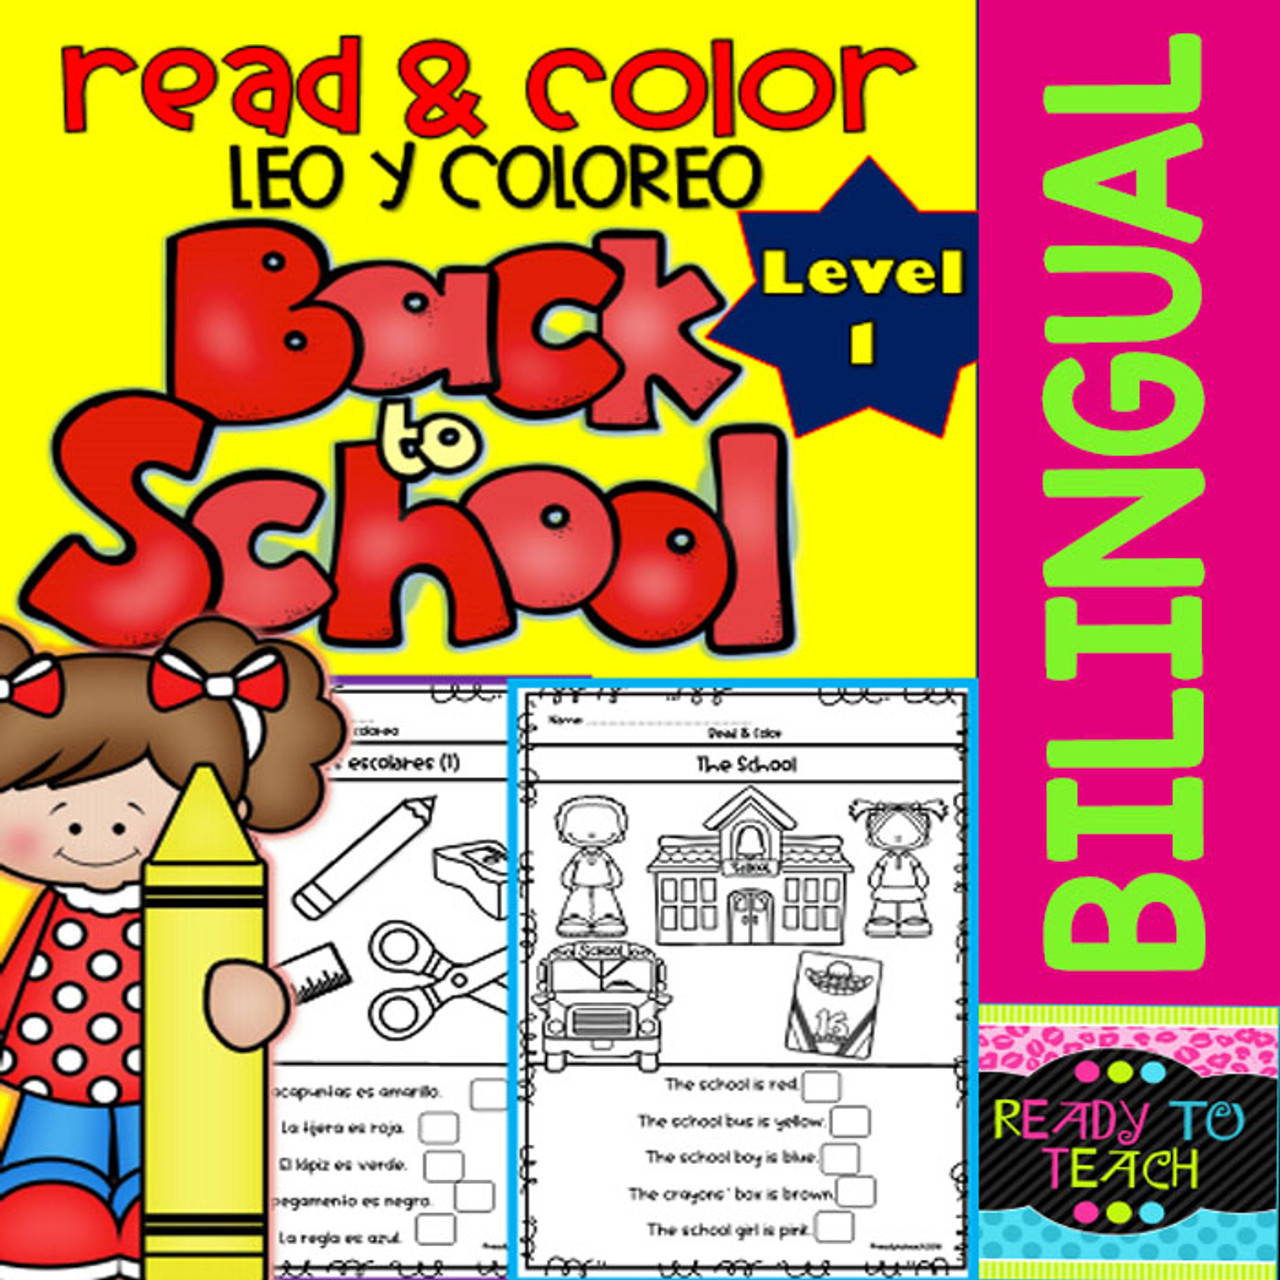 Read & Color - Leo y coloreo - Back to School - Amped Up Learning